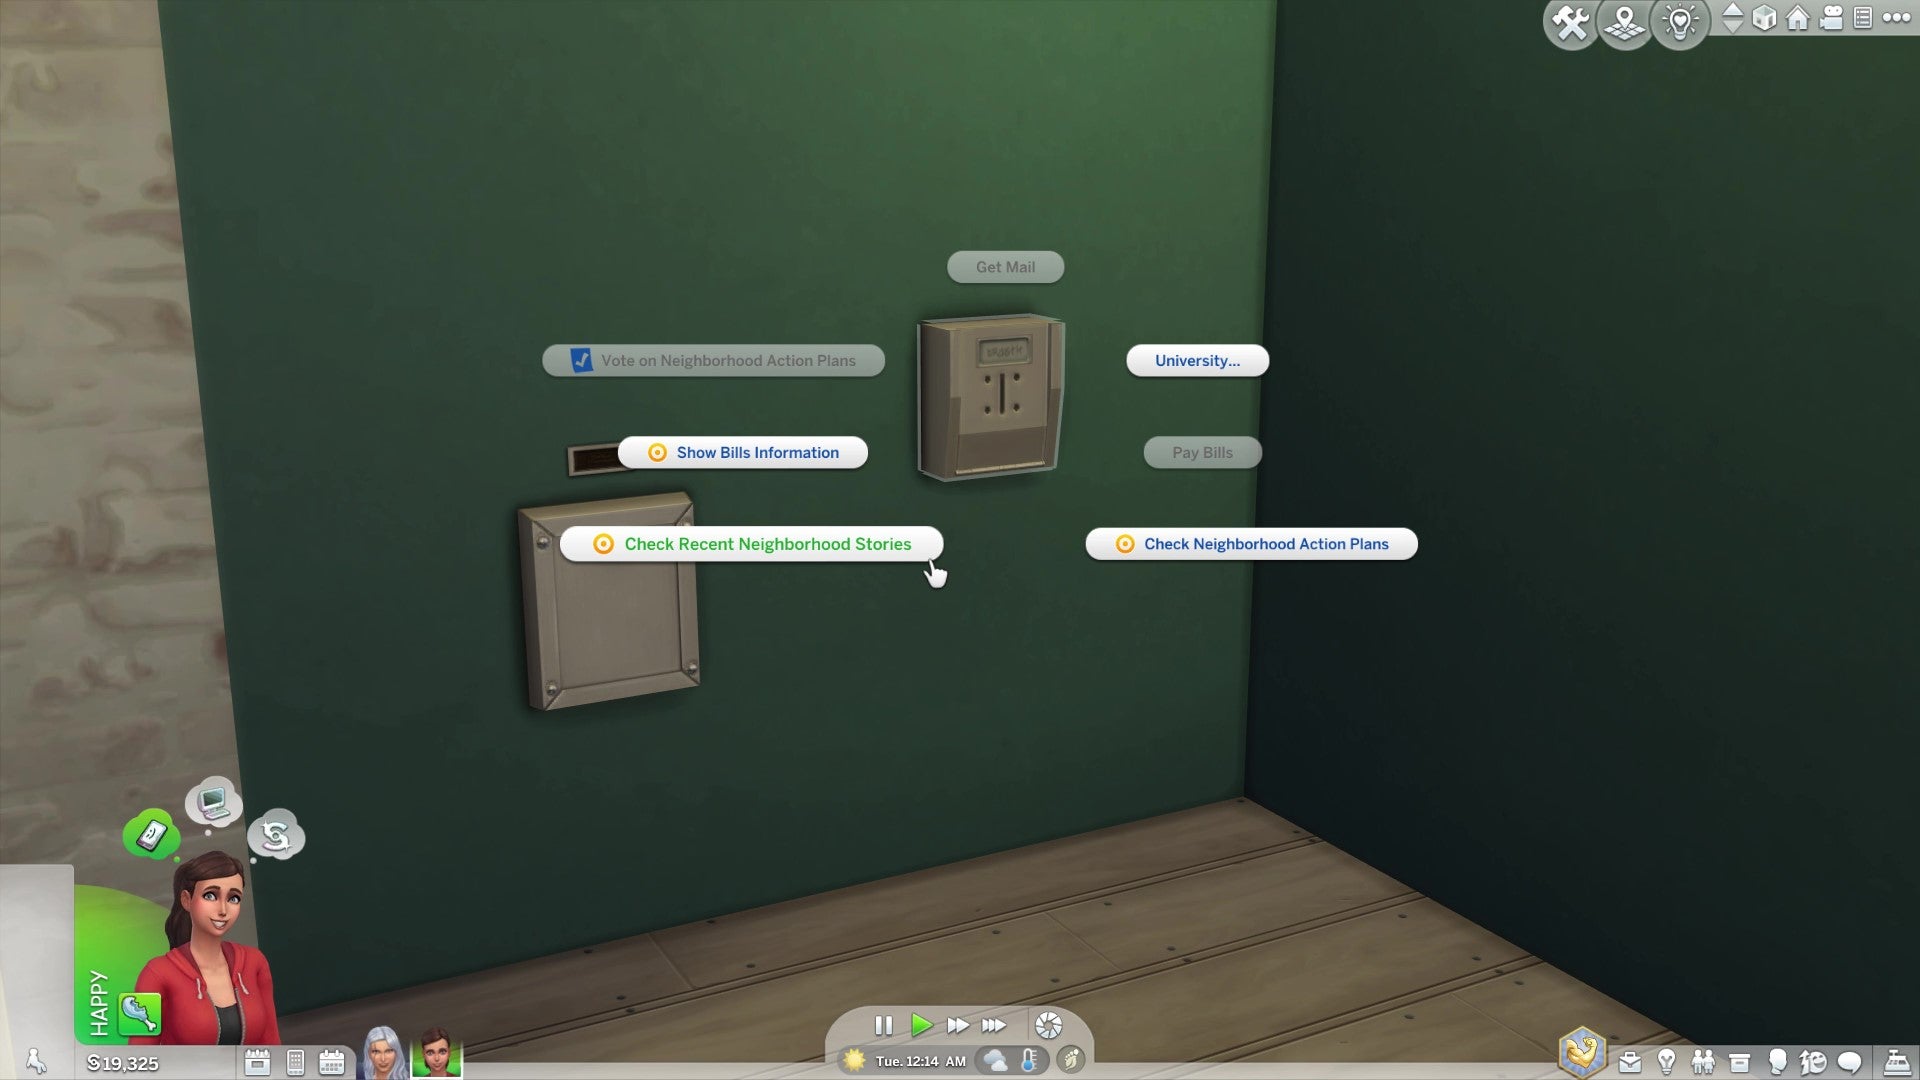 A mailbox in an apartment building in The Sims 4 with all interactions displayed. The new "Check Neighborhood Stories" option is highlighted.